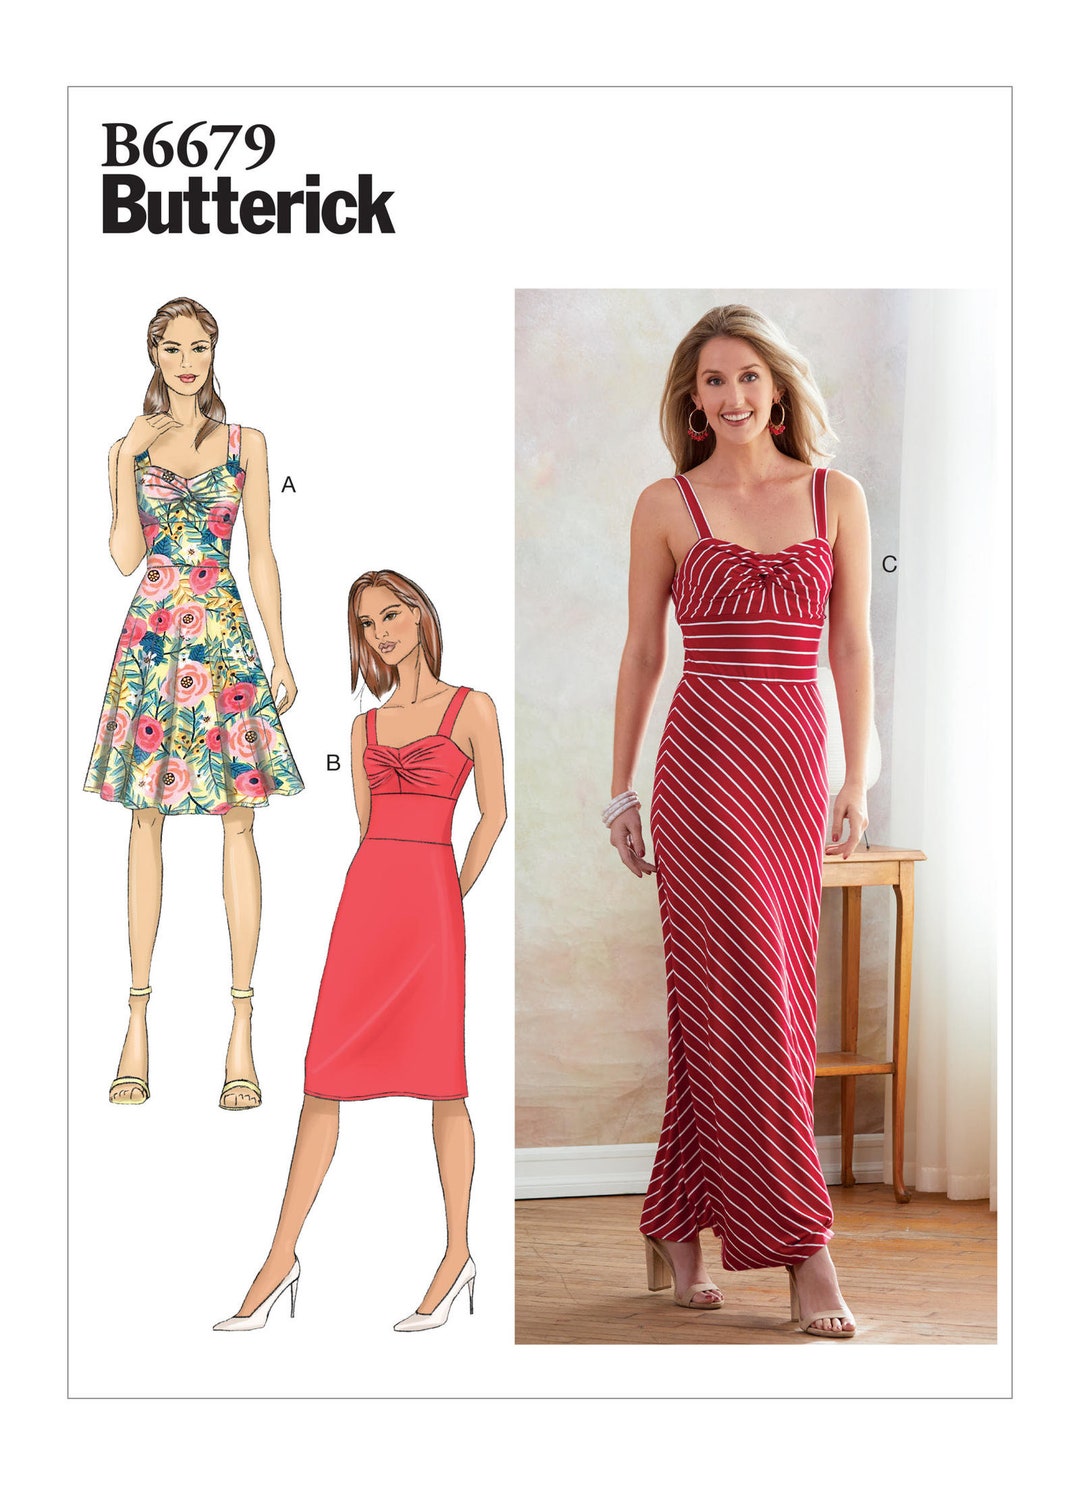 Butterick Sewing Pattern B6679 Misses' Dress - Etsy